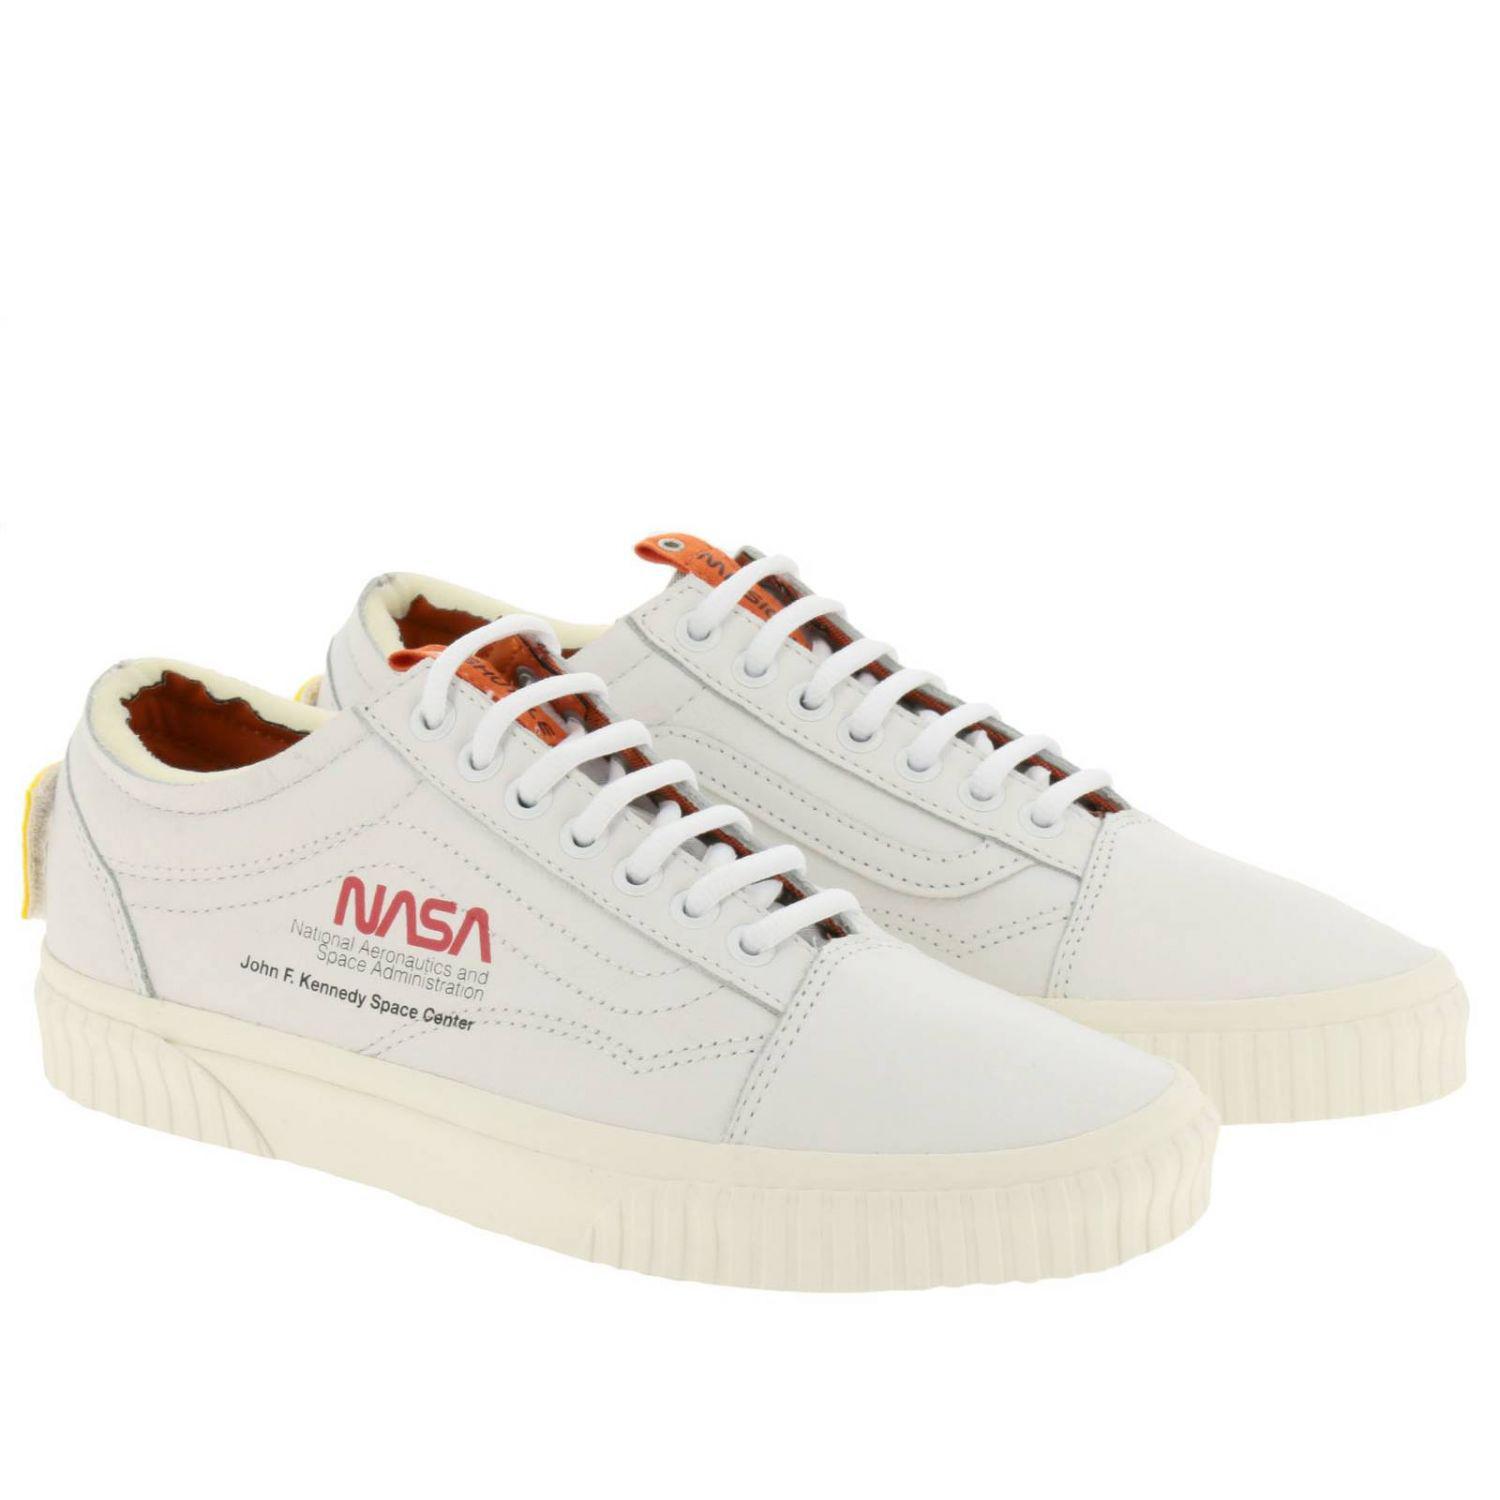 Vans Voyager Nasa Old Sneakers In Premium Leather in White for Men - Lyst